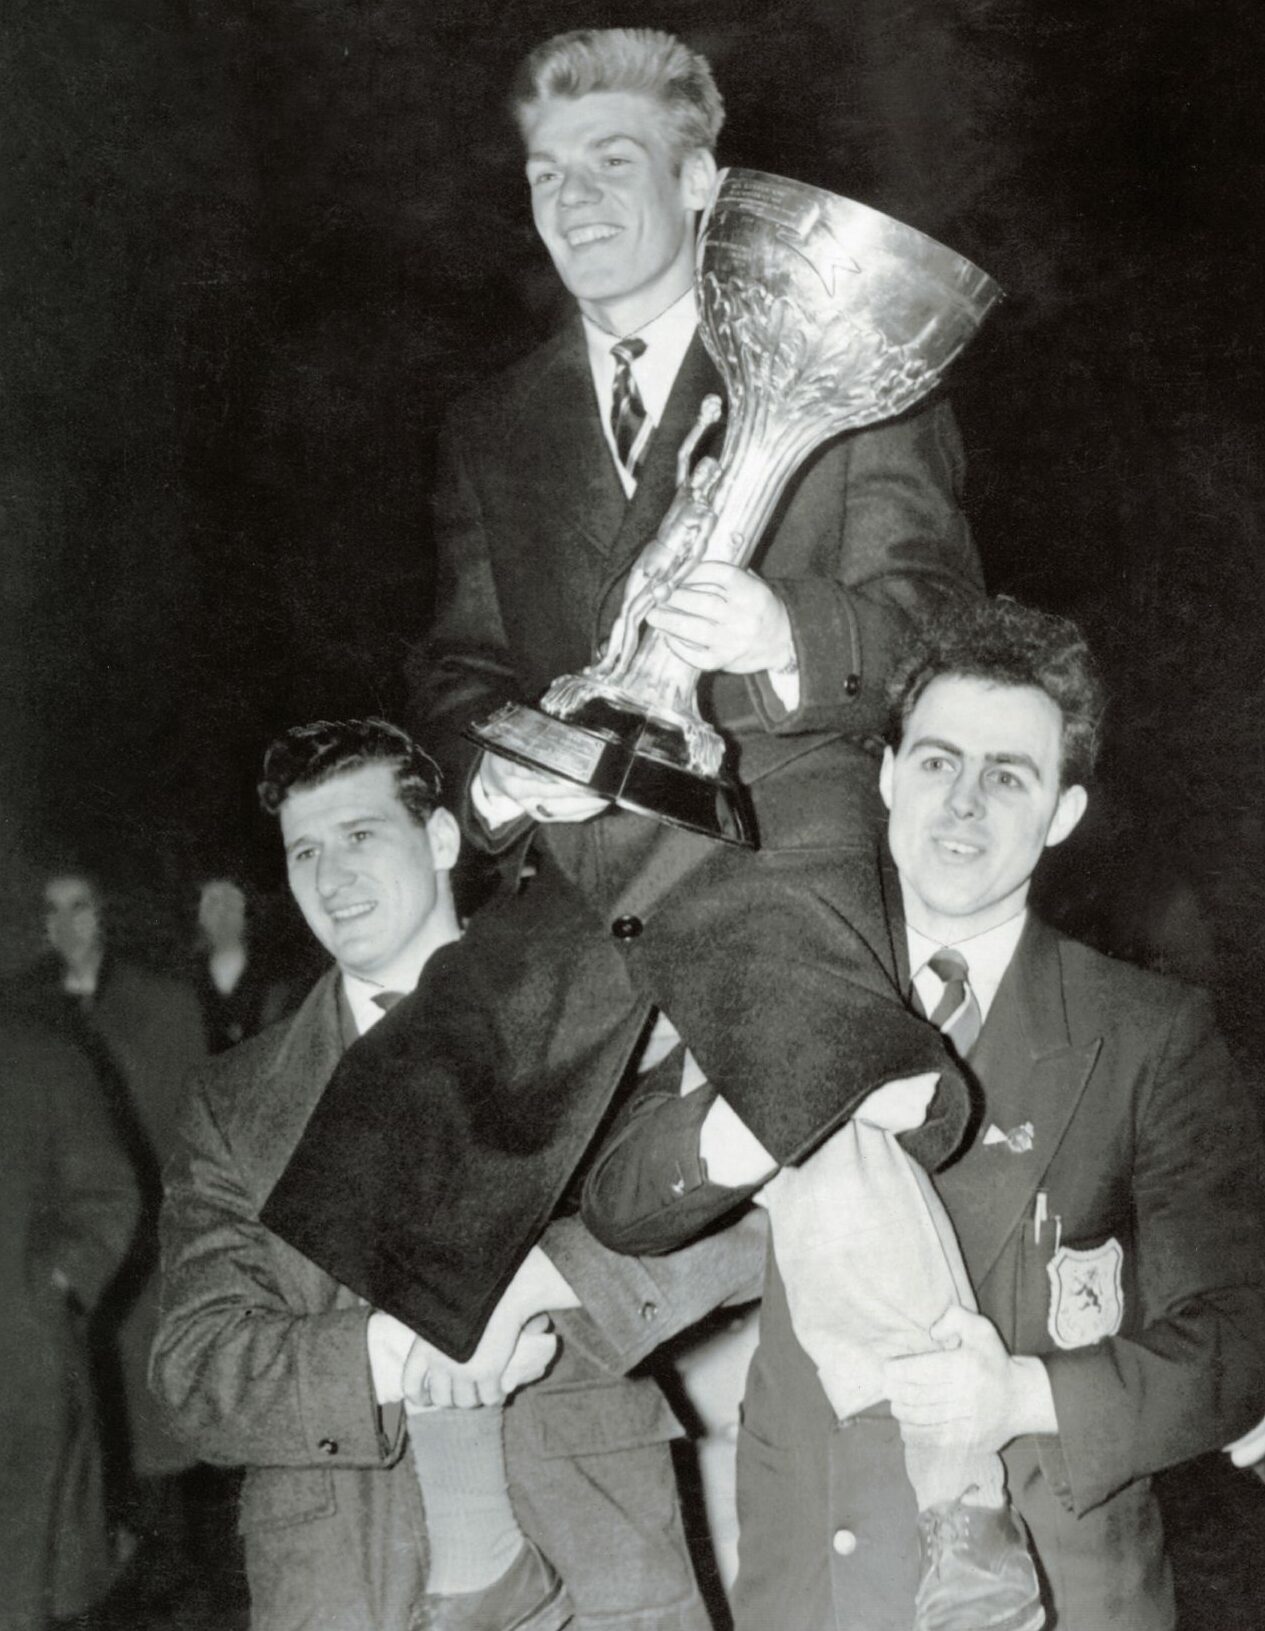 Dick McTaggart, being carried shoulder high, arrives back in Dundee with the gold medal and the Val Barker trophy. Image: DC Thomson.